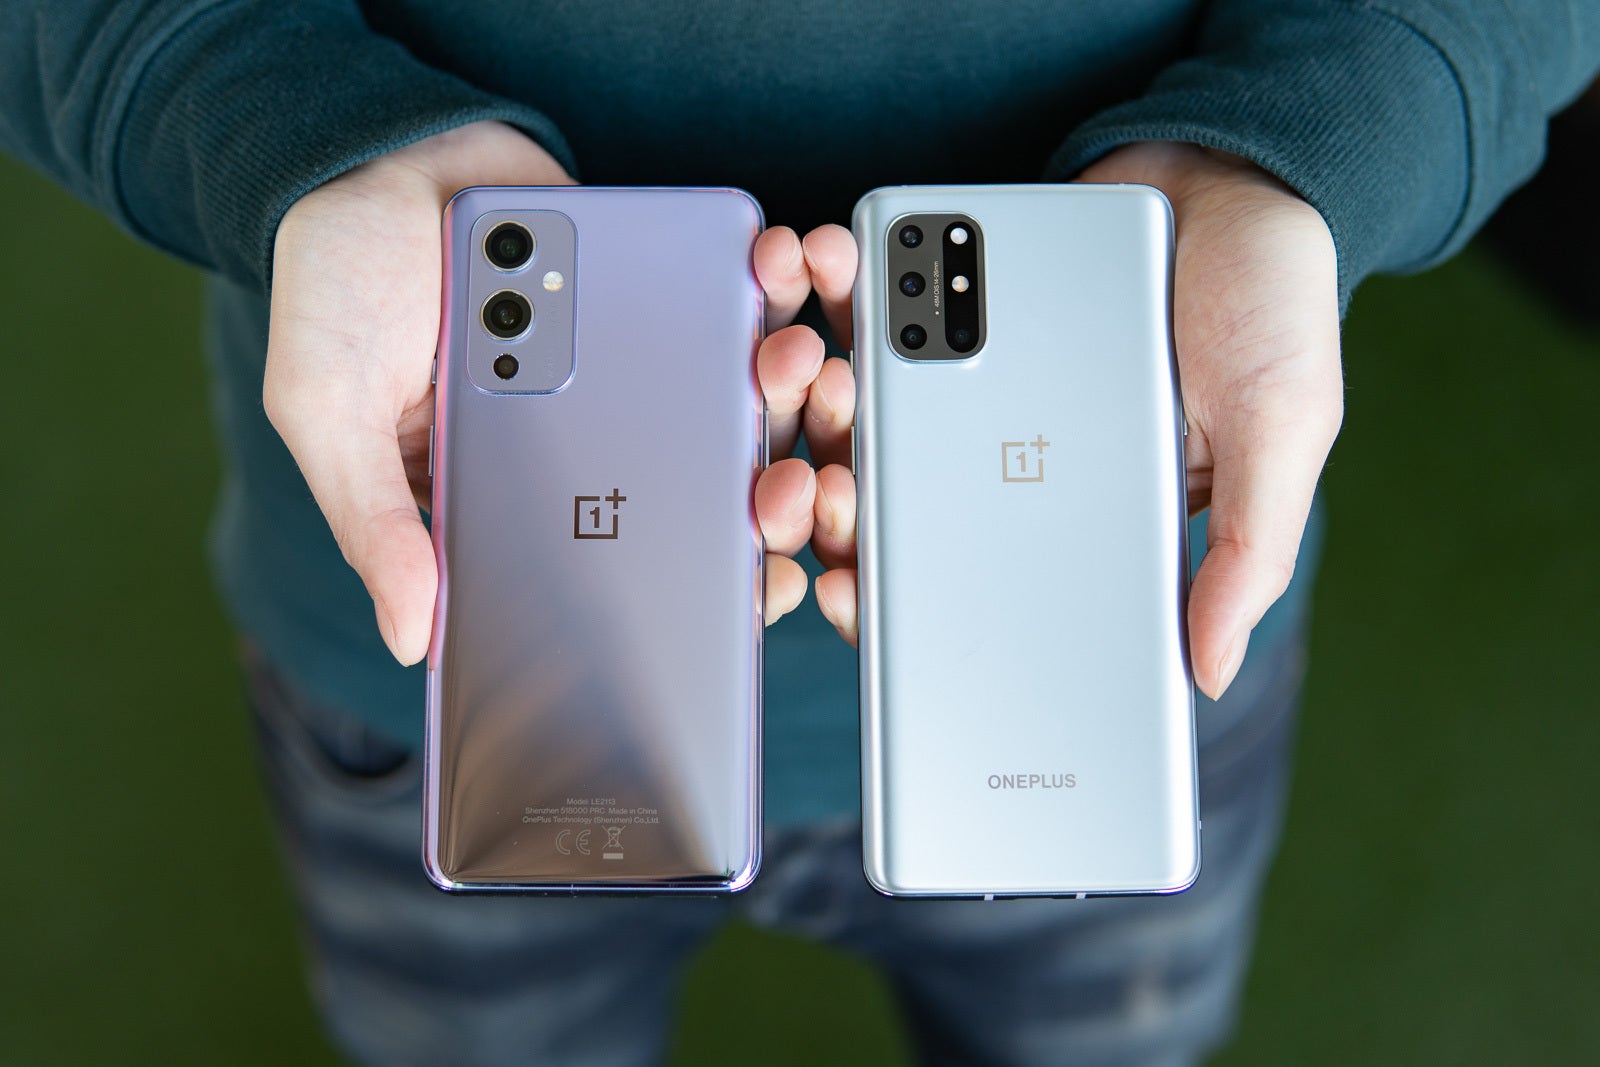 Both the OnePlus 9 and OnePlus 8 devices will receive the new co-developed with Oppo software - OnePlus announces new unified OS with Oppo; confirms OnePlus 9T is dead